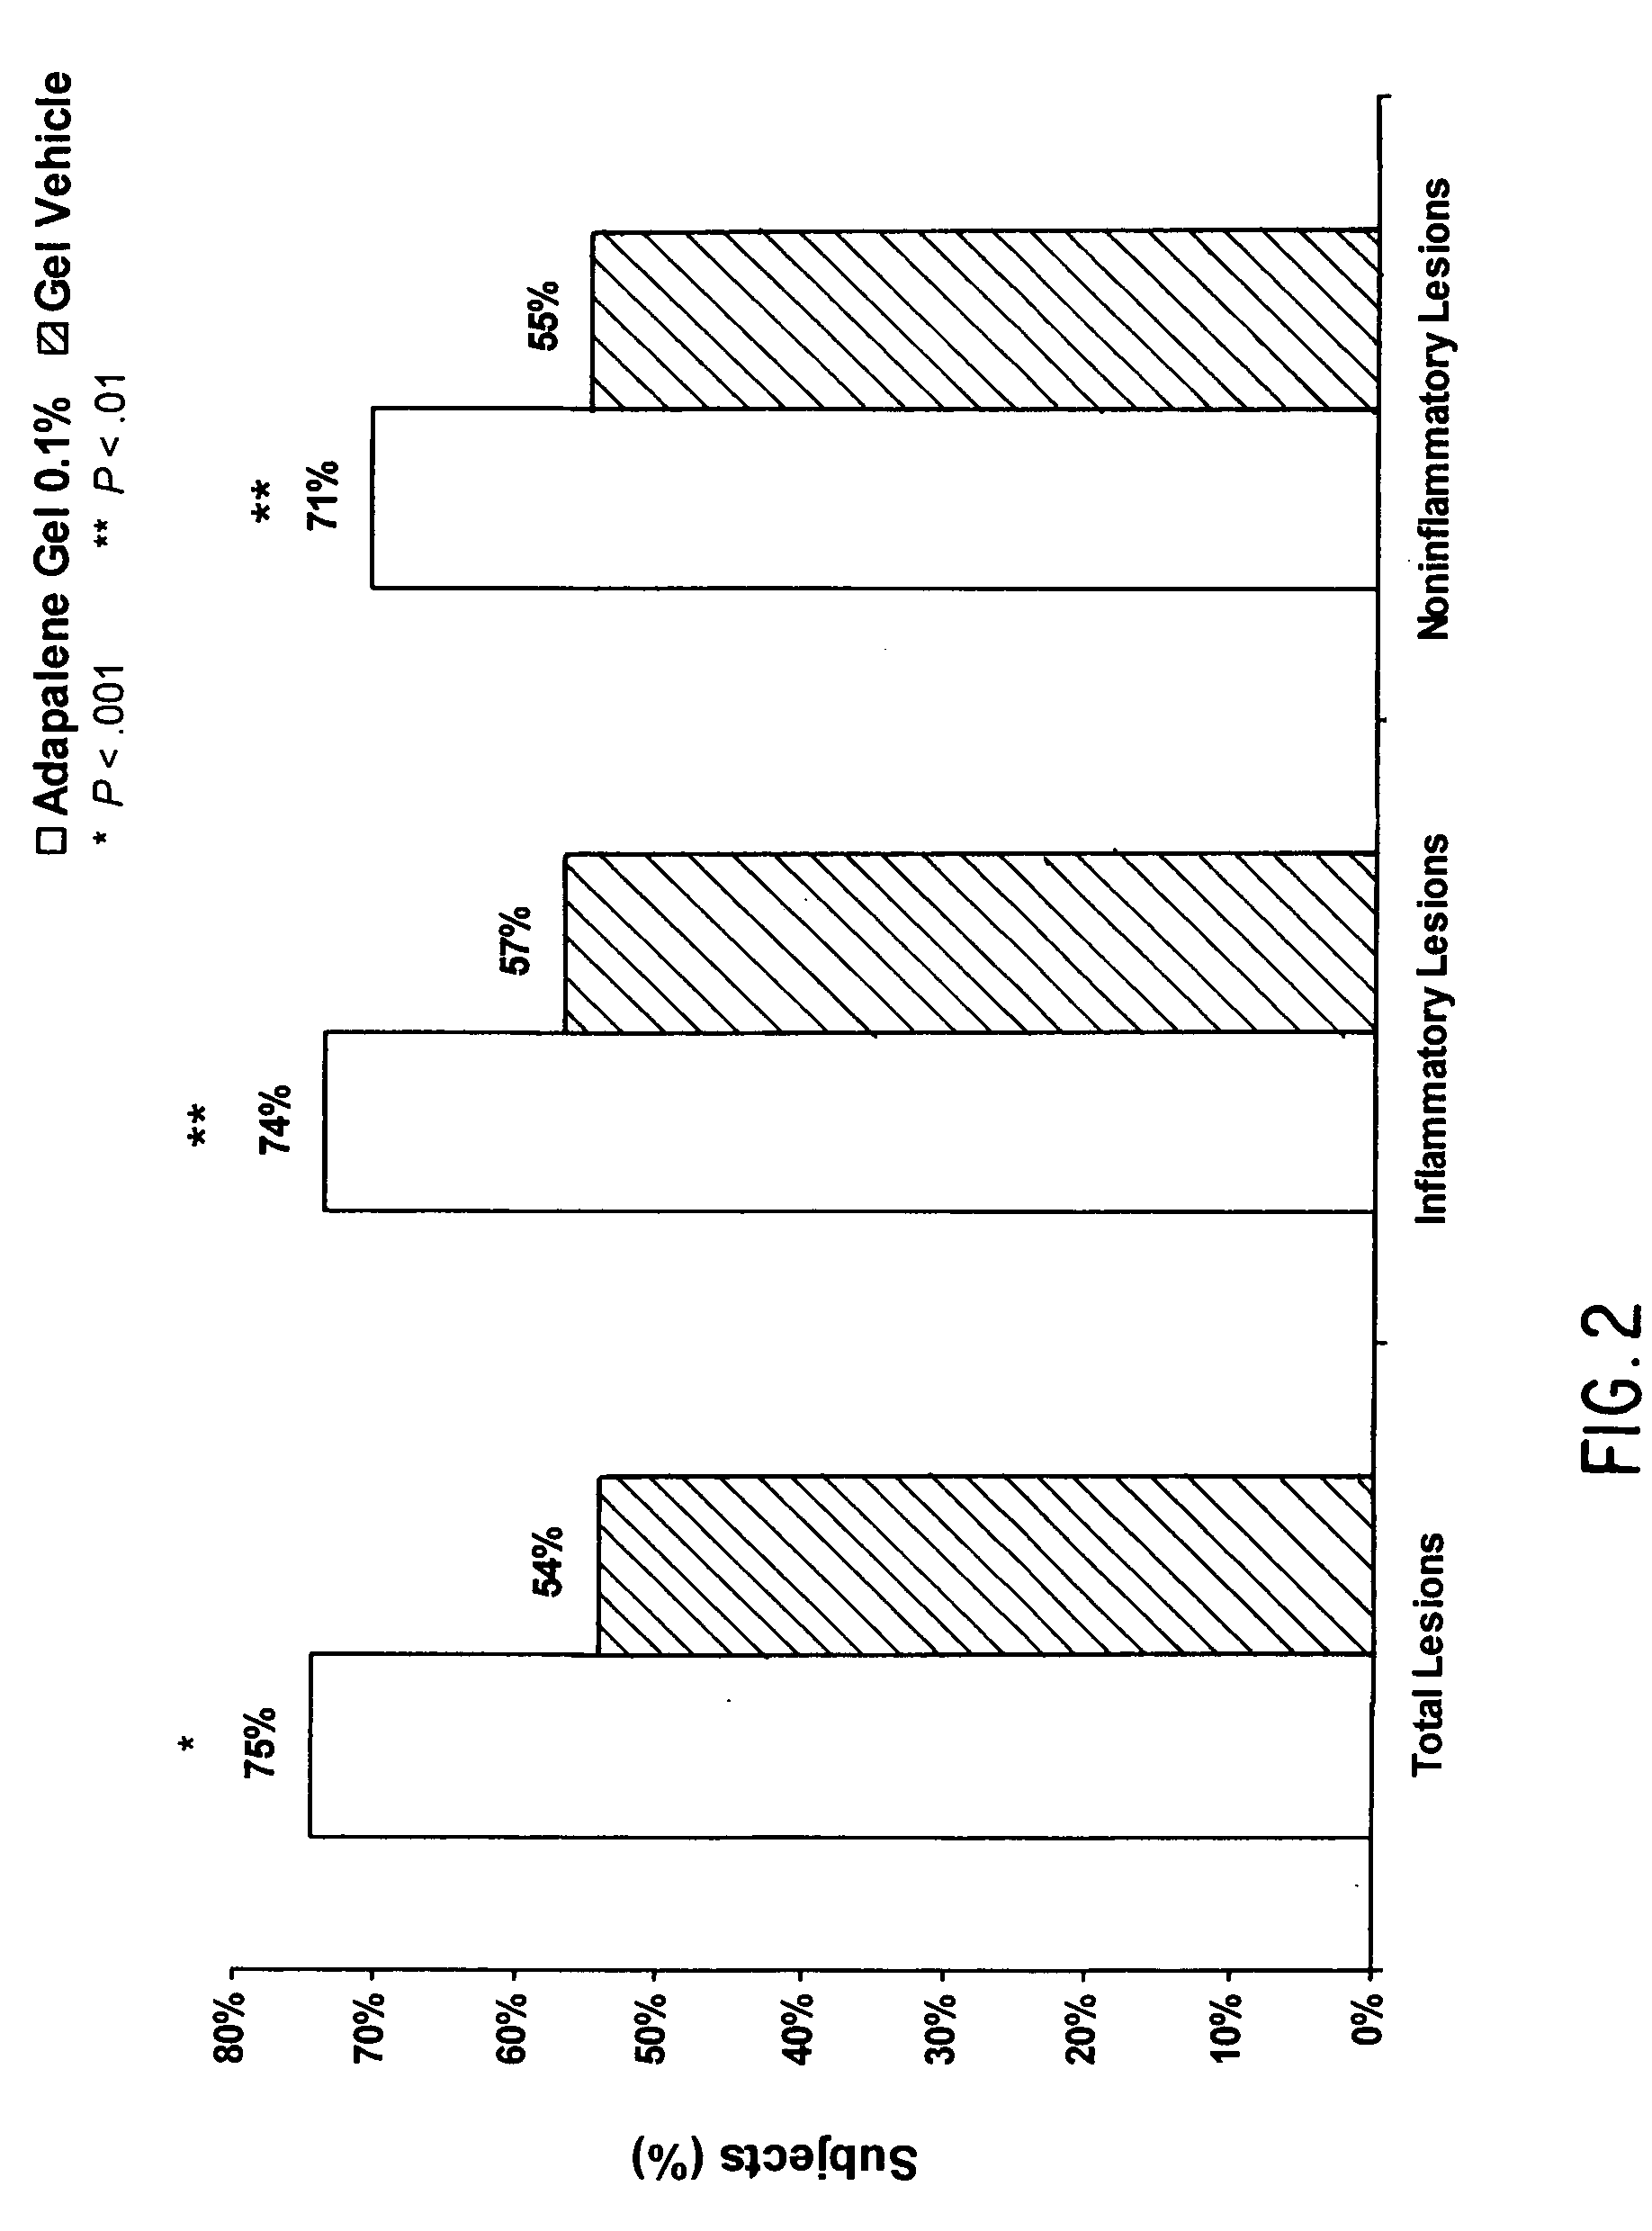 Method of using adapalene in acne maintenance therapy